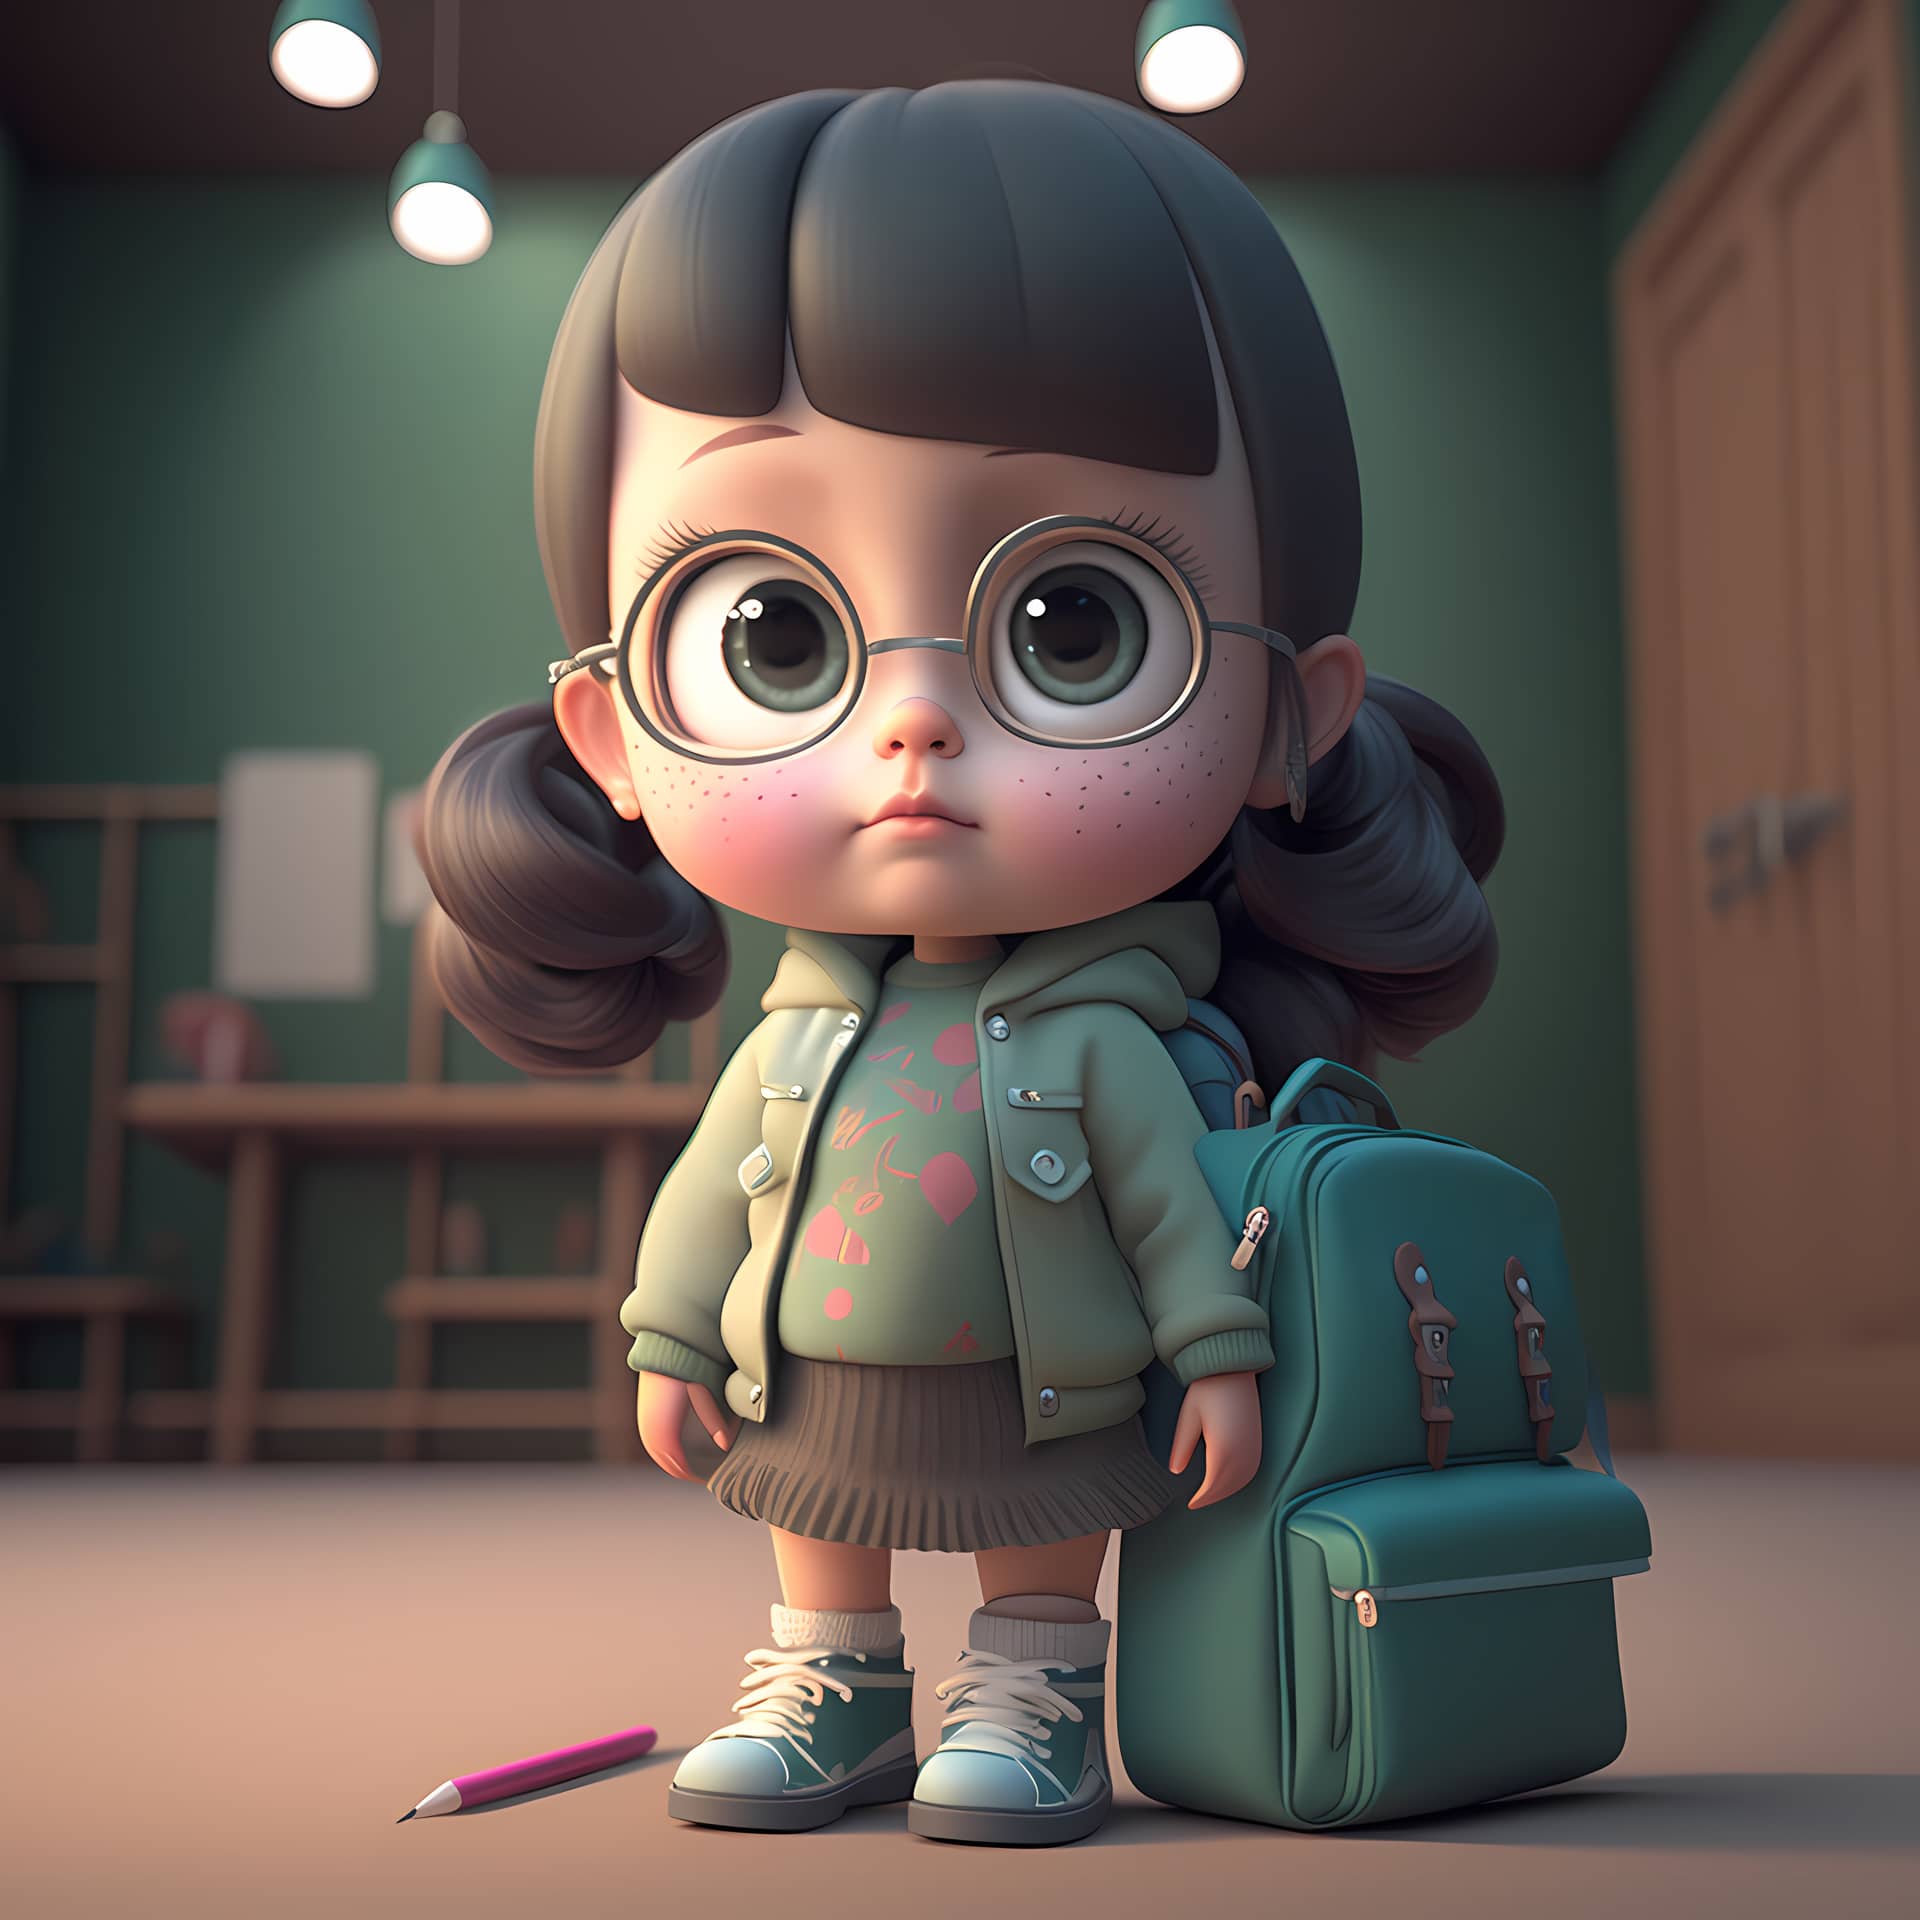 Adorable cute kid girls with school background 3d illustration